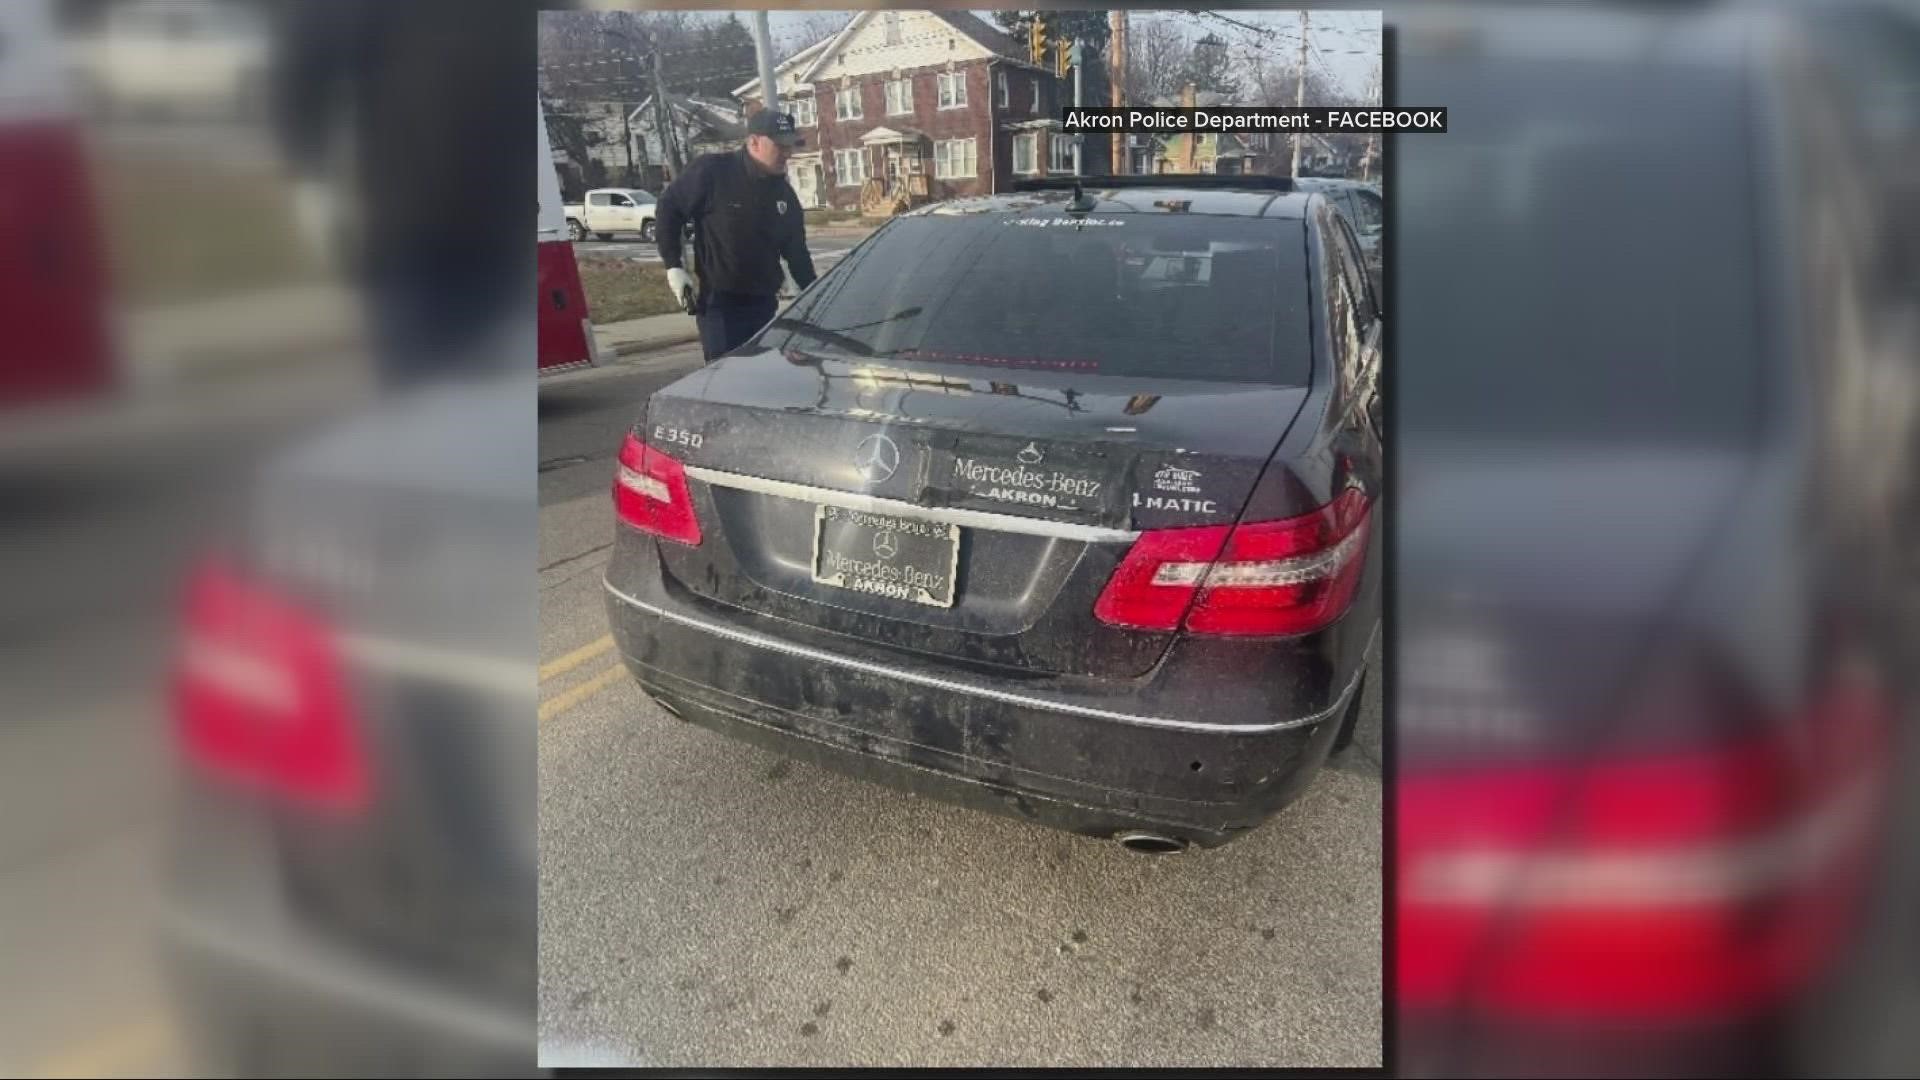 Akron Police are searching for a 2011 dark blue/black Mercedes E350 4matic sedan.